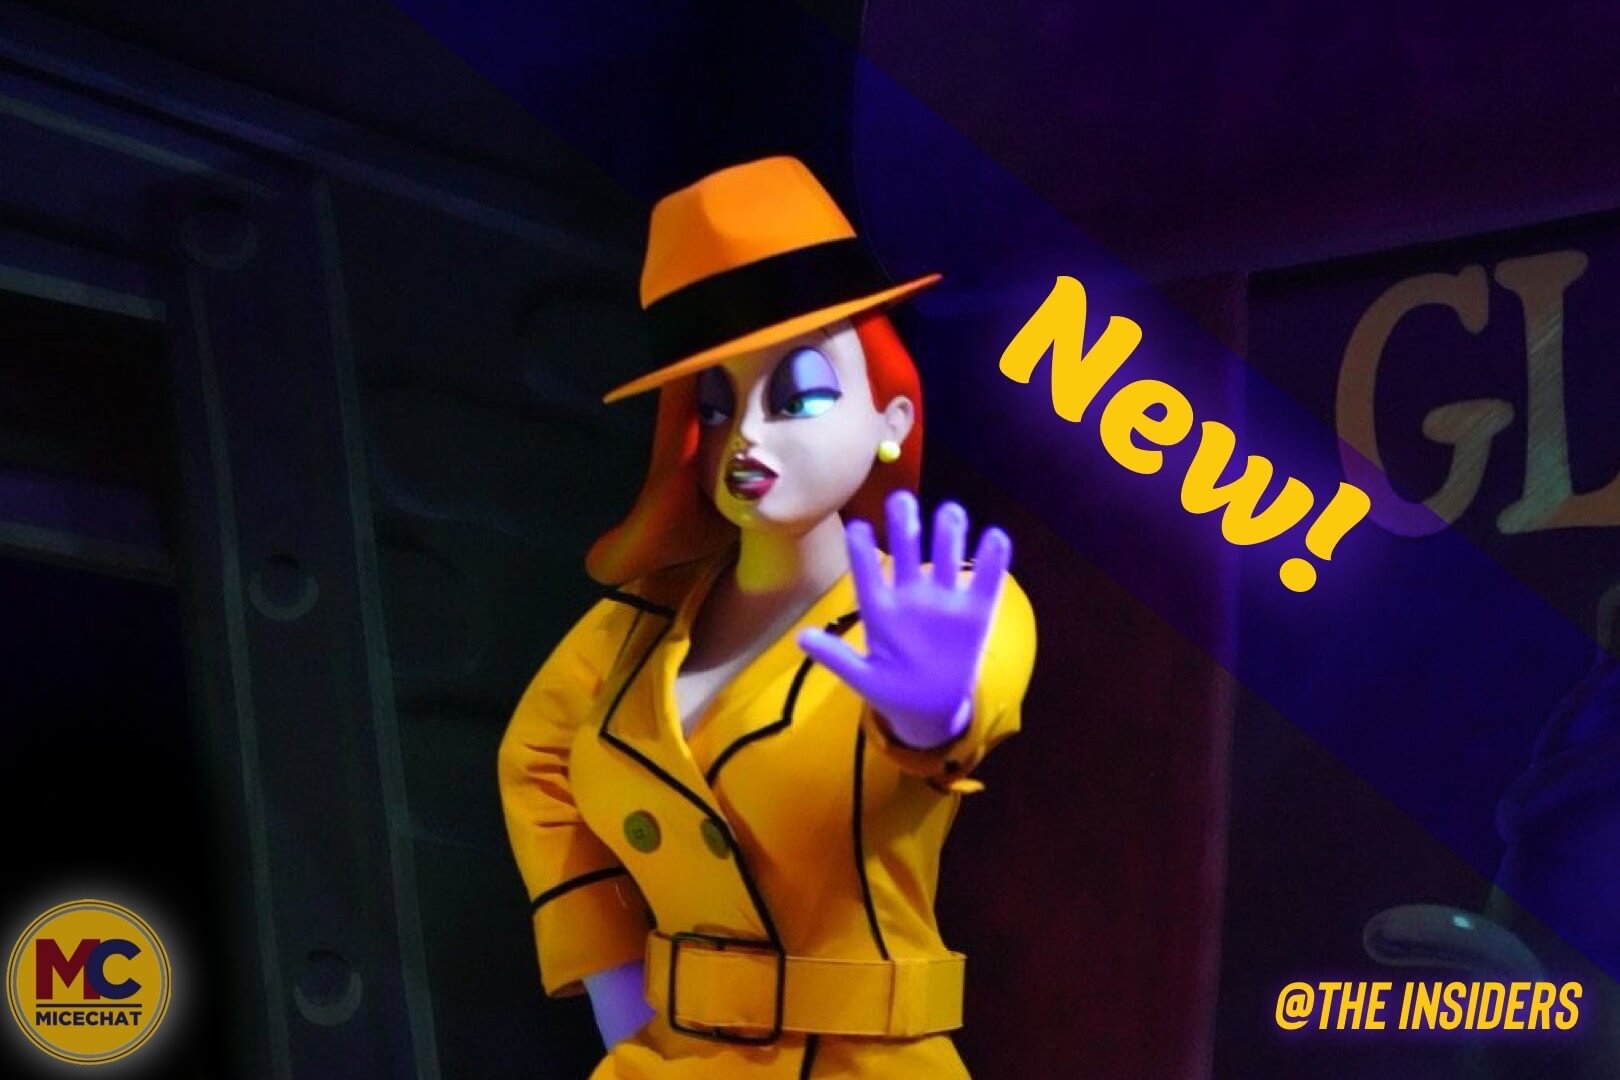 Roger Rabbit Cover Up at Disneyland - Jessica's New Starring Role